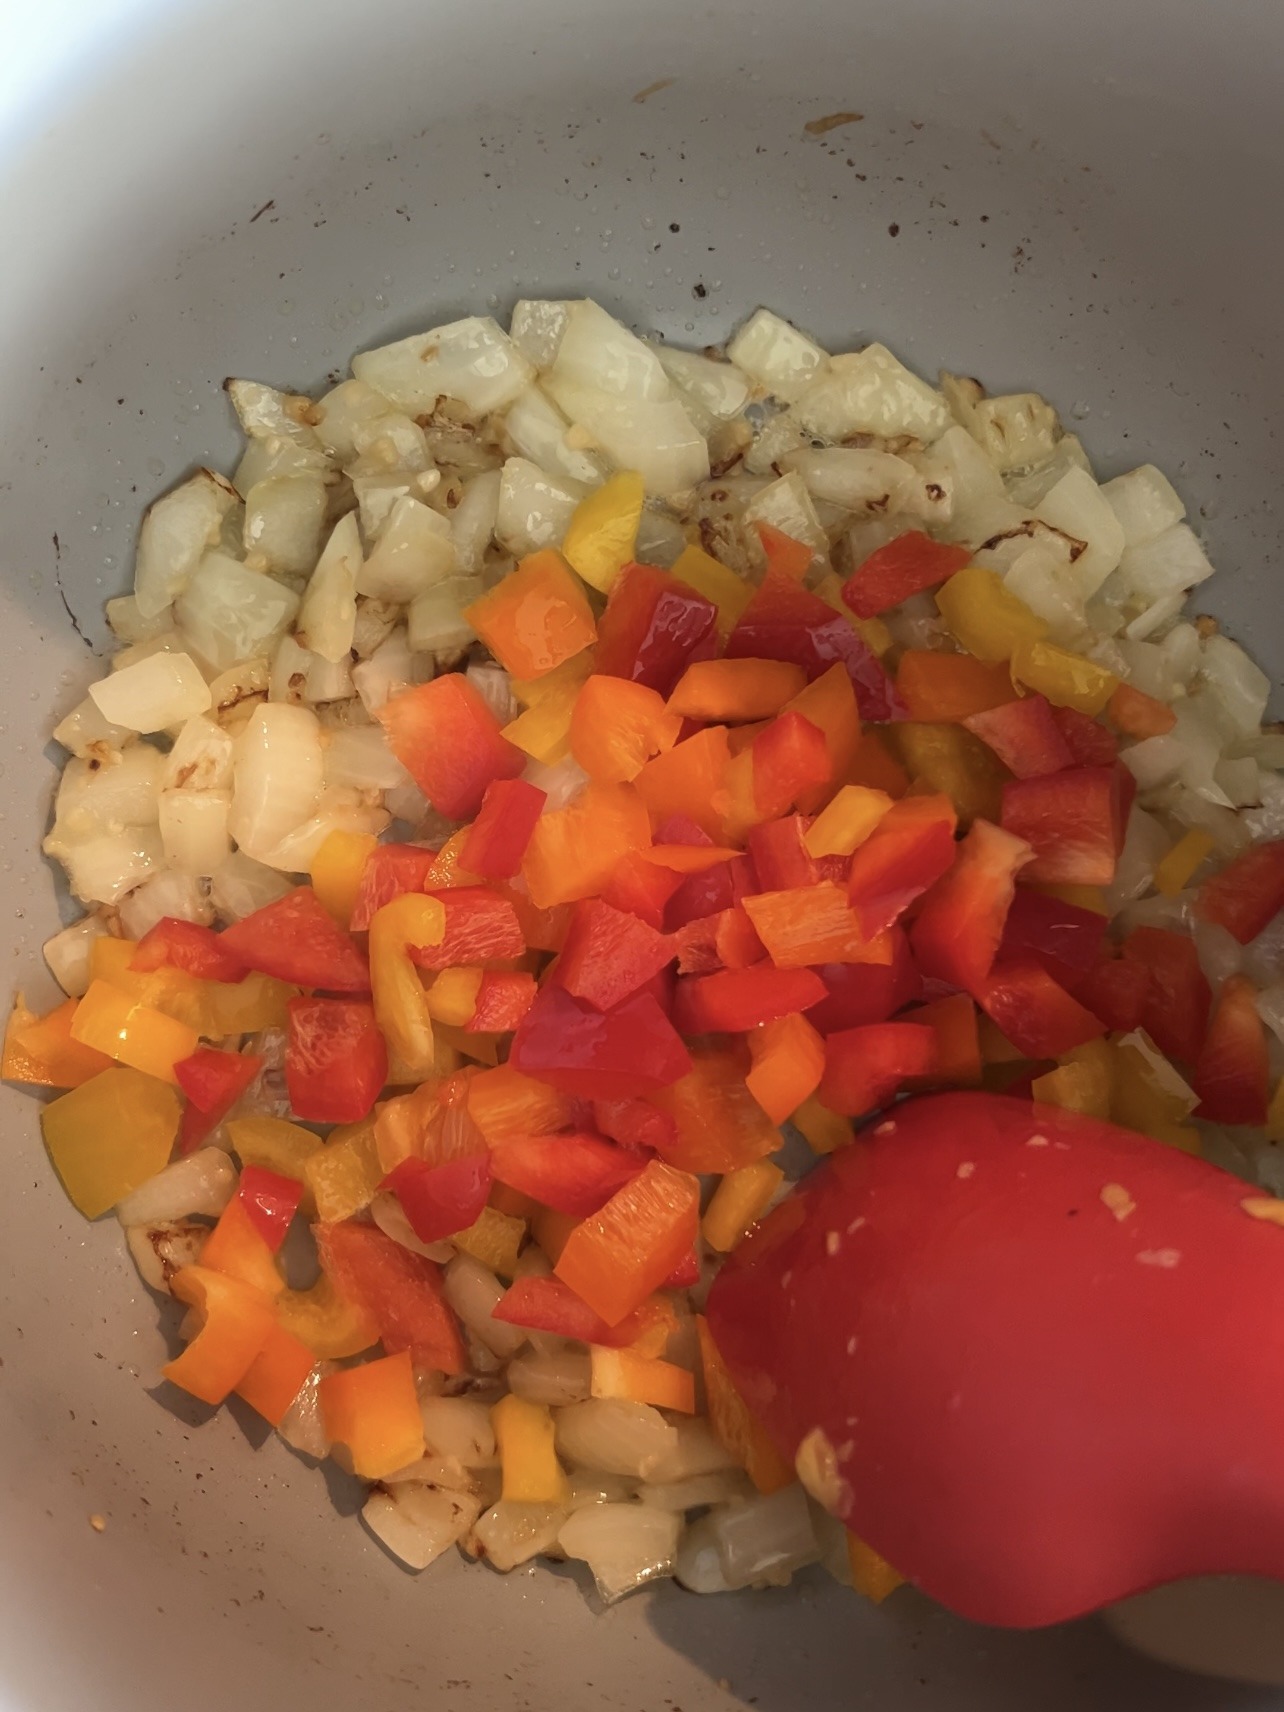 Sautéing onions and bell peppers in a large skillet.